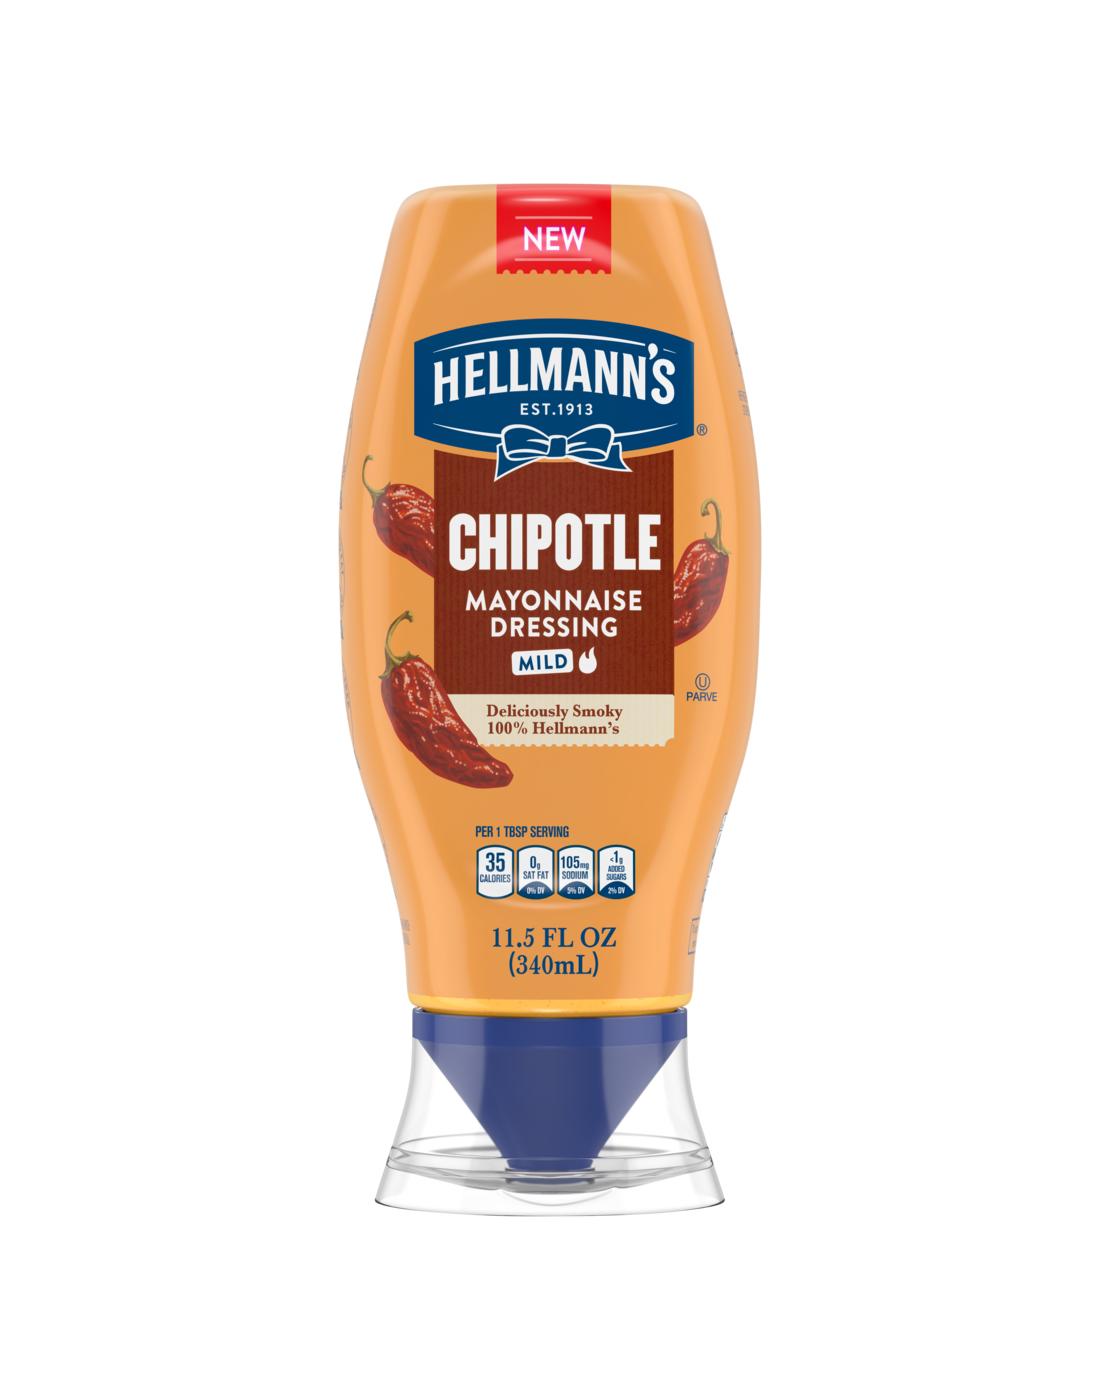 Hellmann's Mild Chipotle Mayonnaise Dressing Squeeze Bottle; image 1 of 2